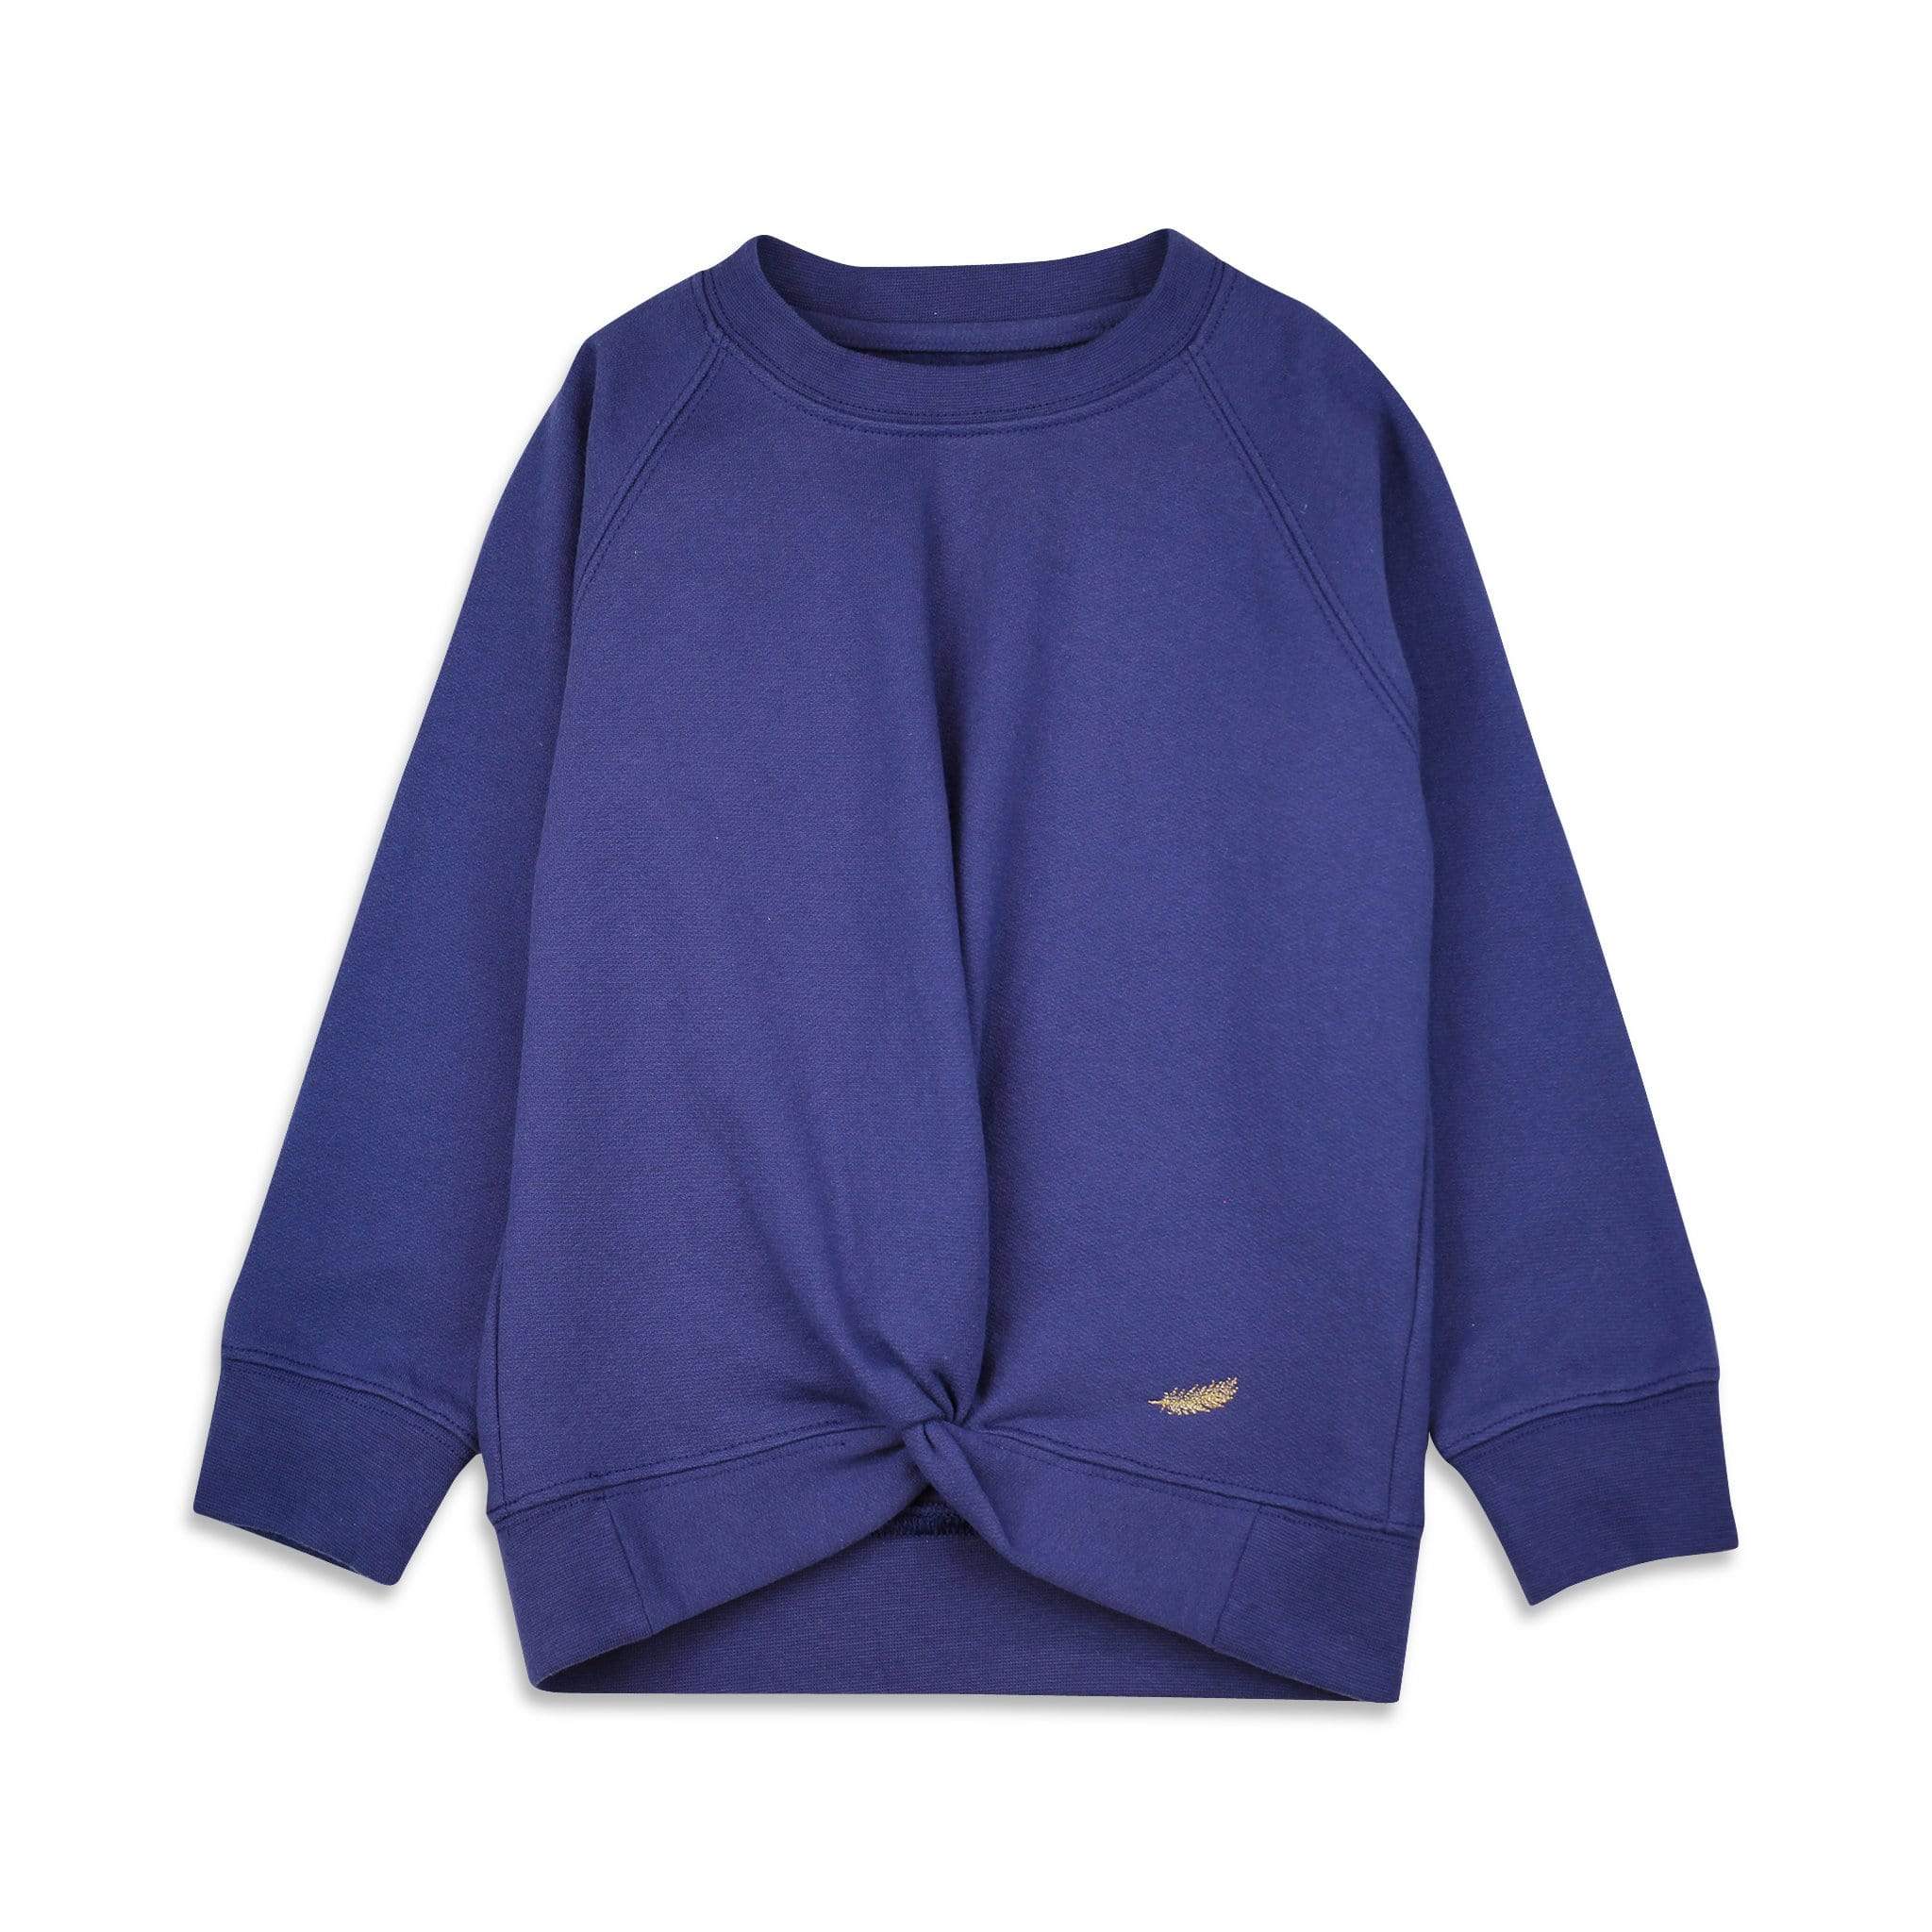 Kids sweatshirts. 100% Organic cotton fleece, cut and sew in NYC. Deep blue color. Golden feather embroidery as a nice and stylish detail. 